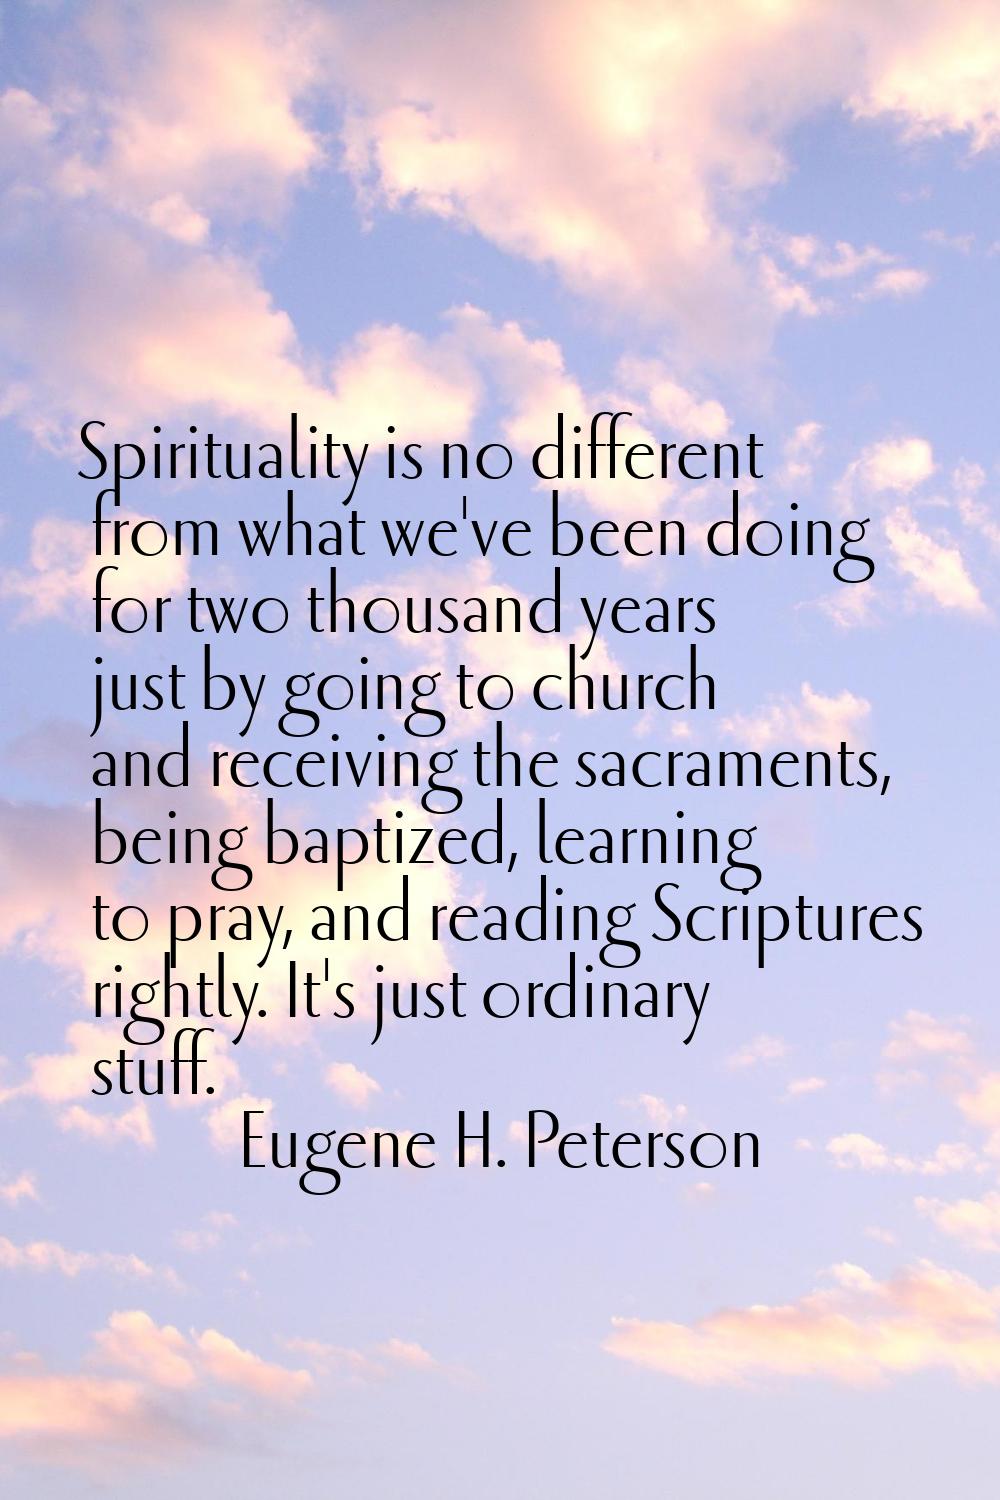 Spirituality is no different from what we've been doing for two thousand years just by going to chu